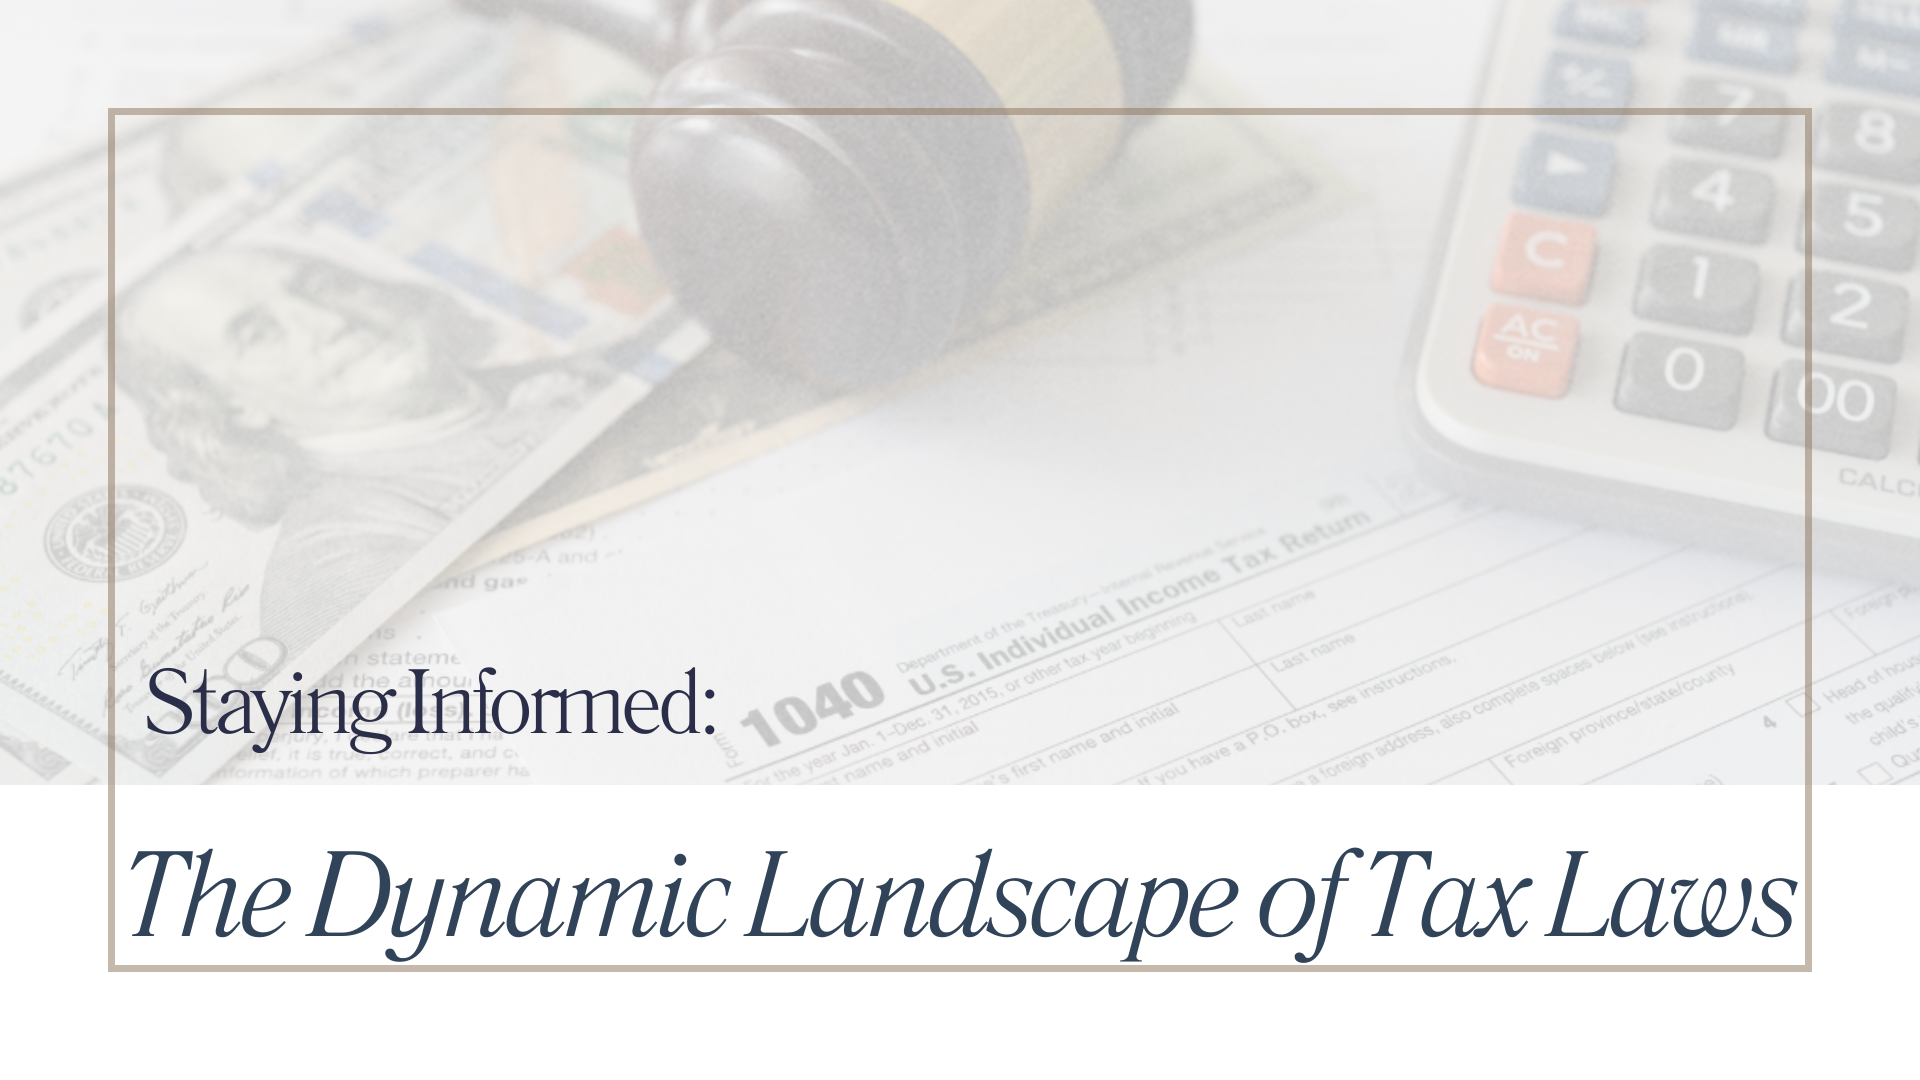 Featured image for “Staying Informed: The Dynamic Landscape of Tax Laws”